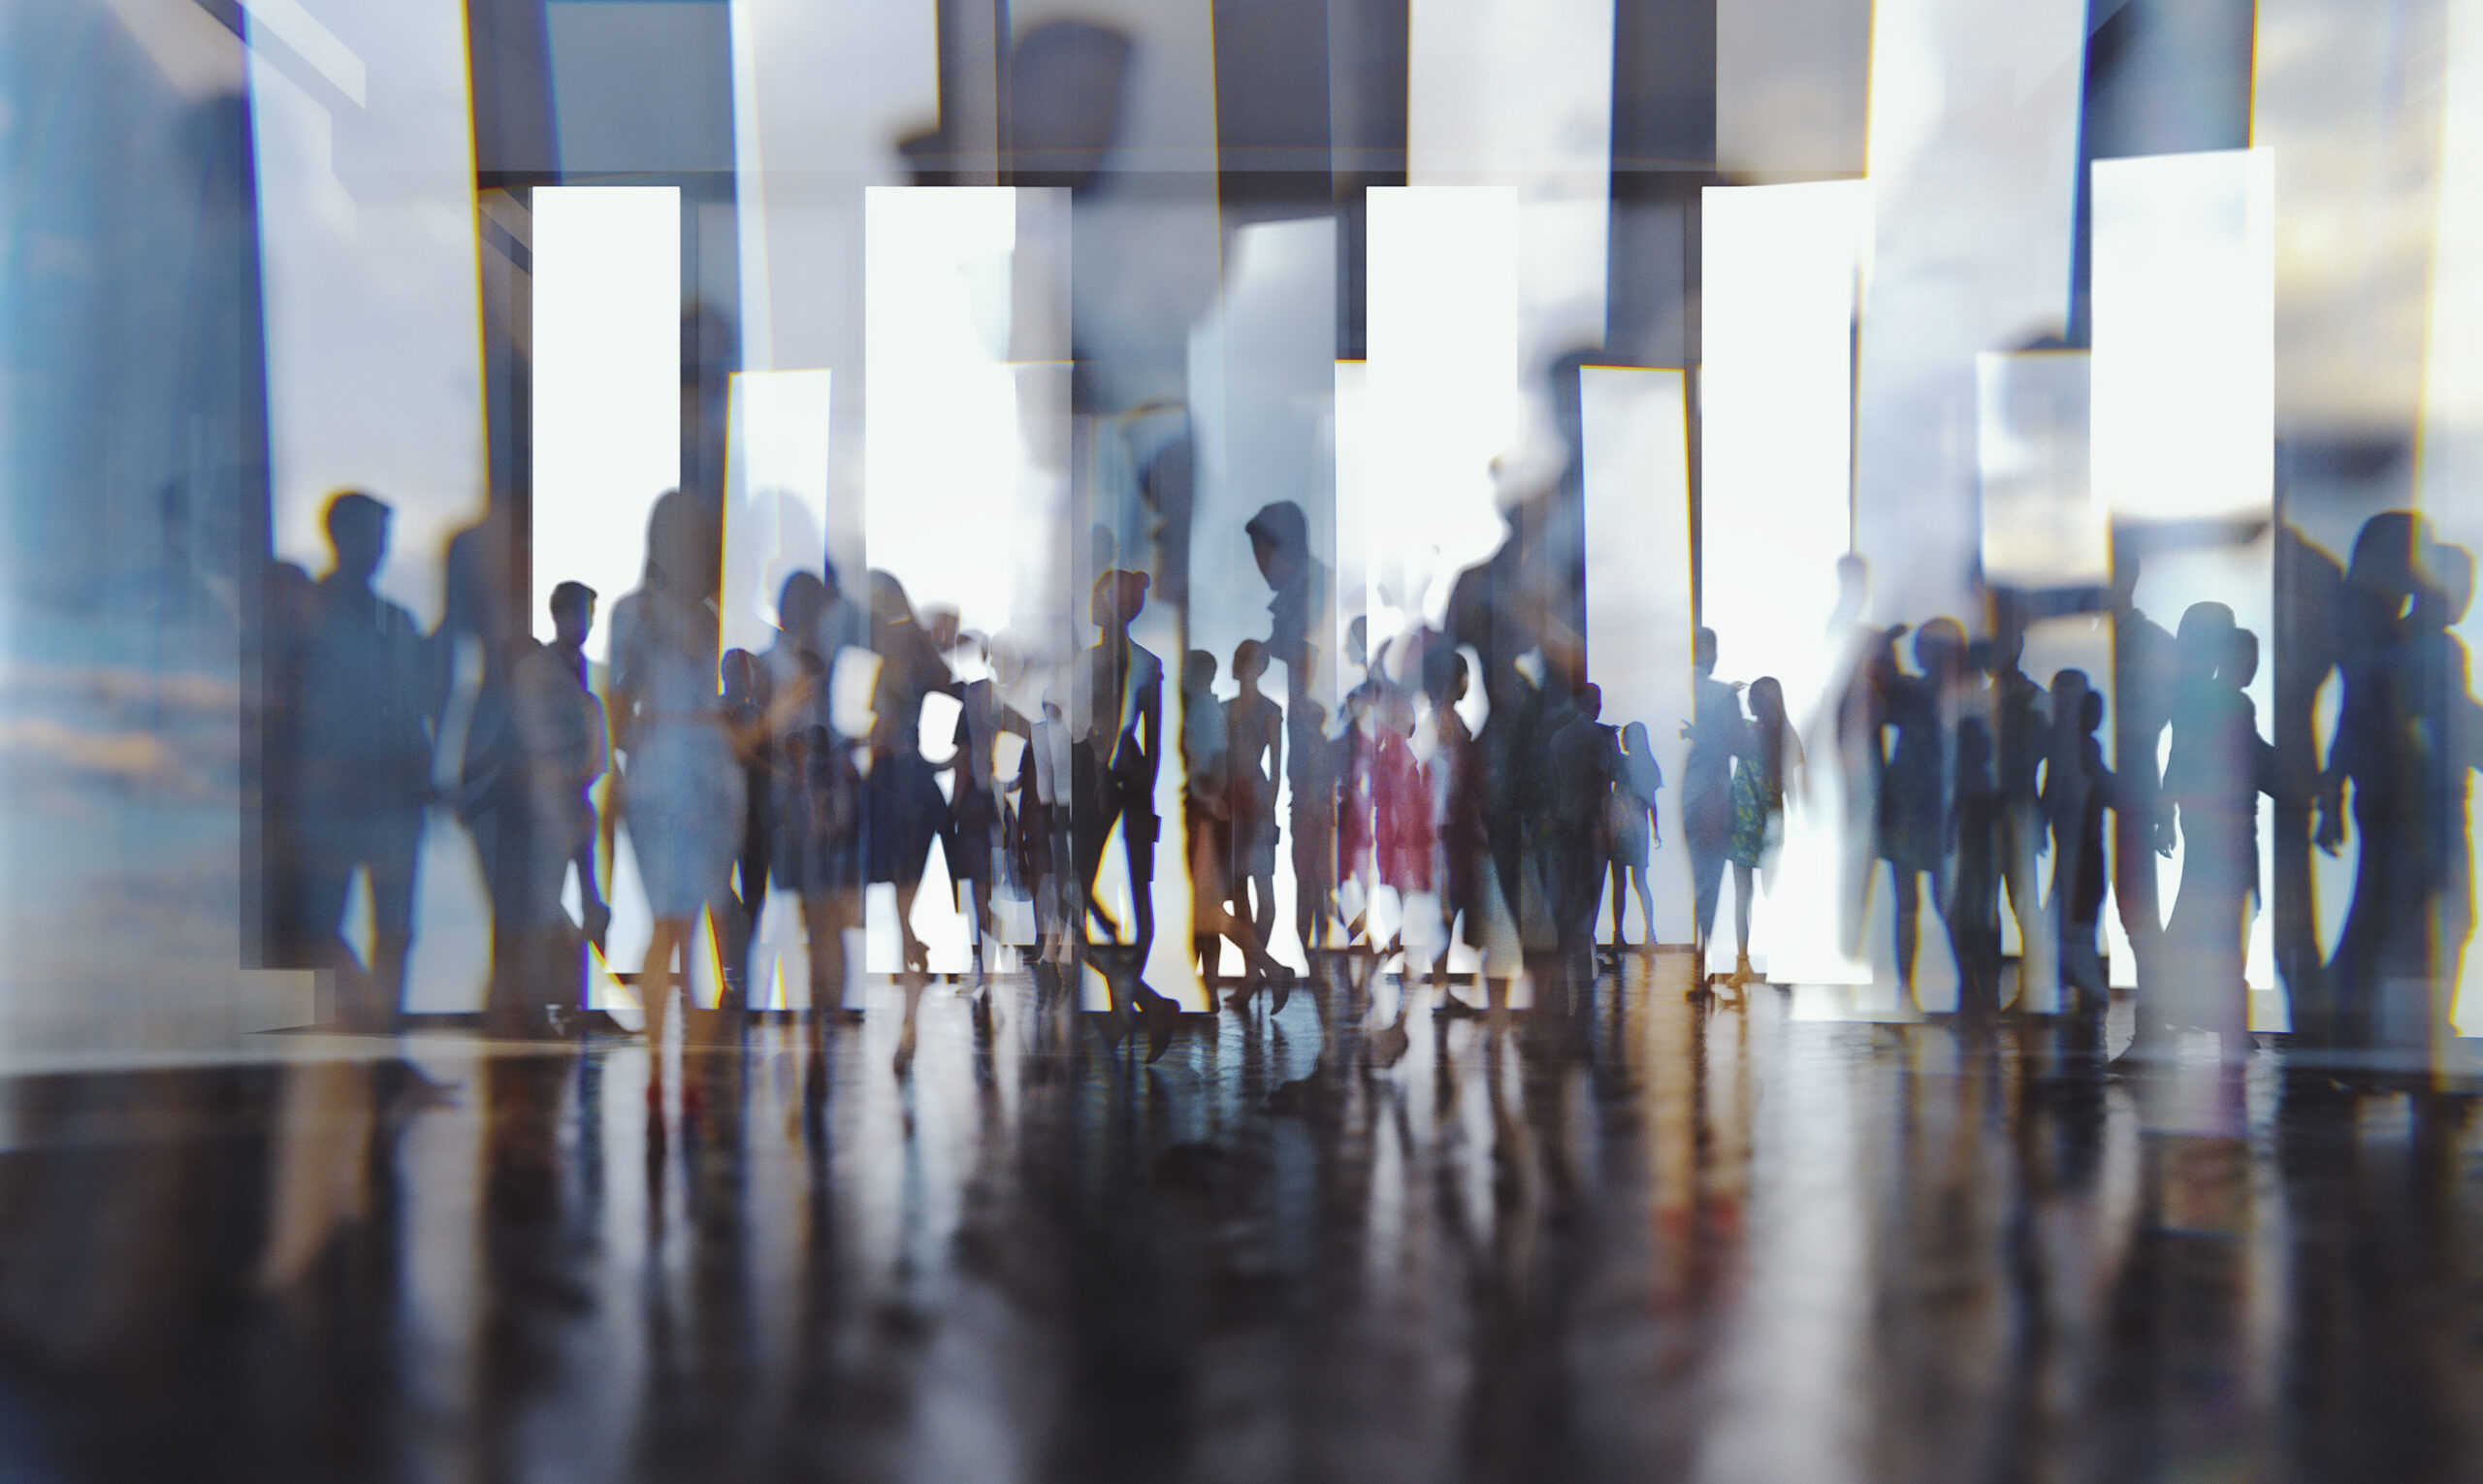 Abstract people silhouettes against glass, 3D generated